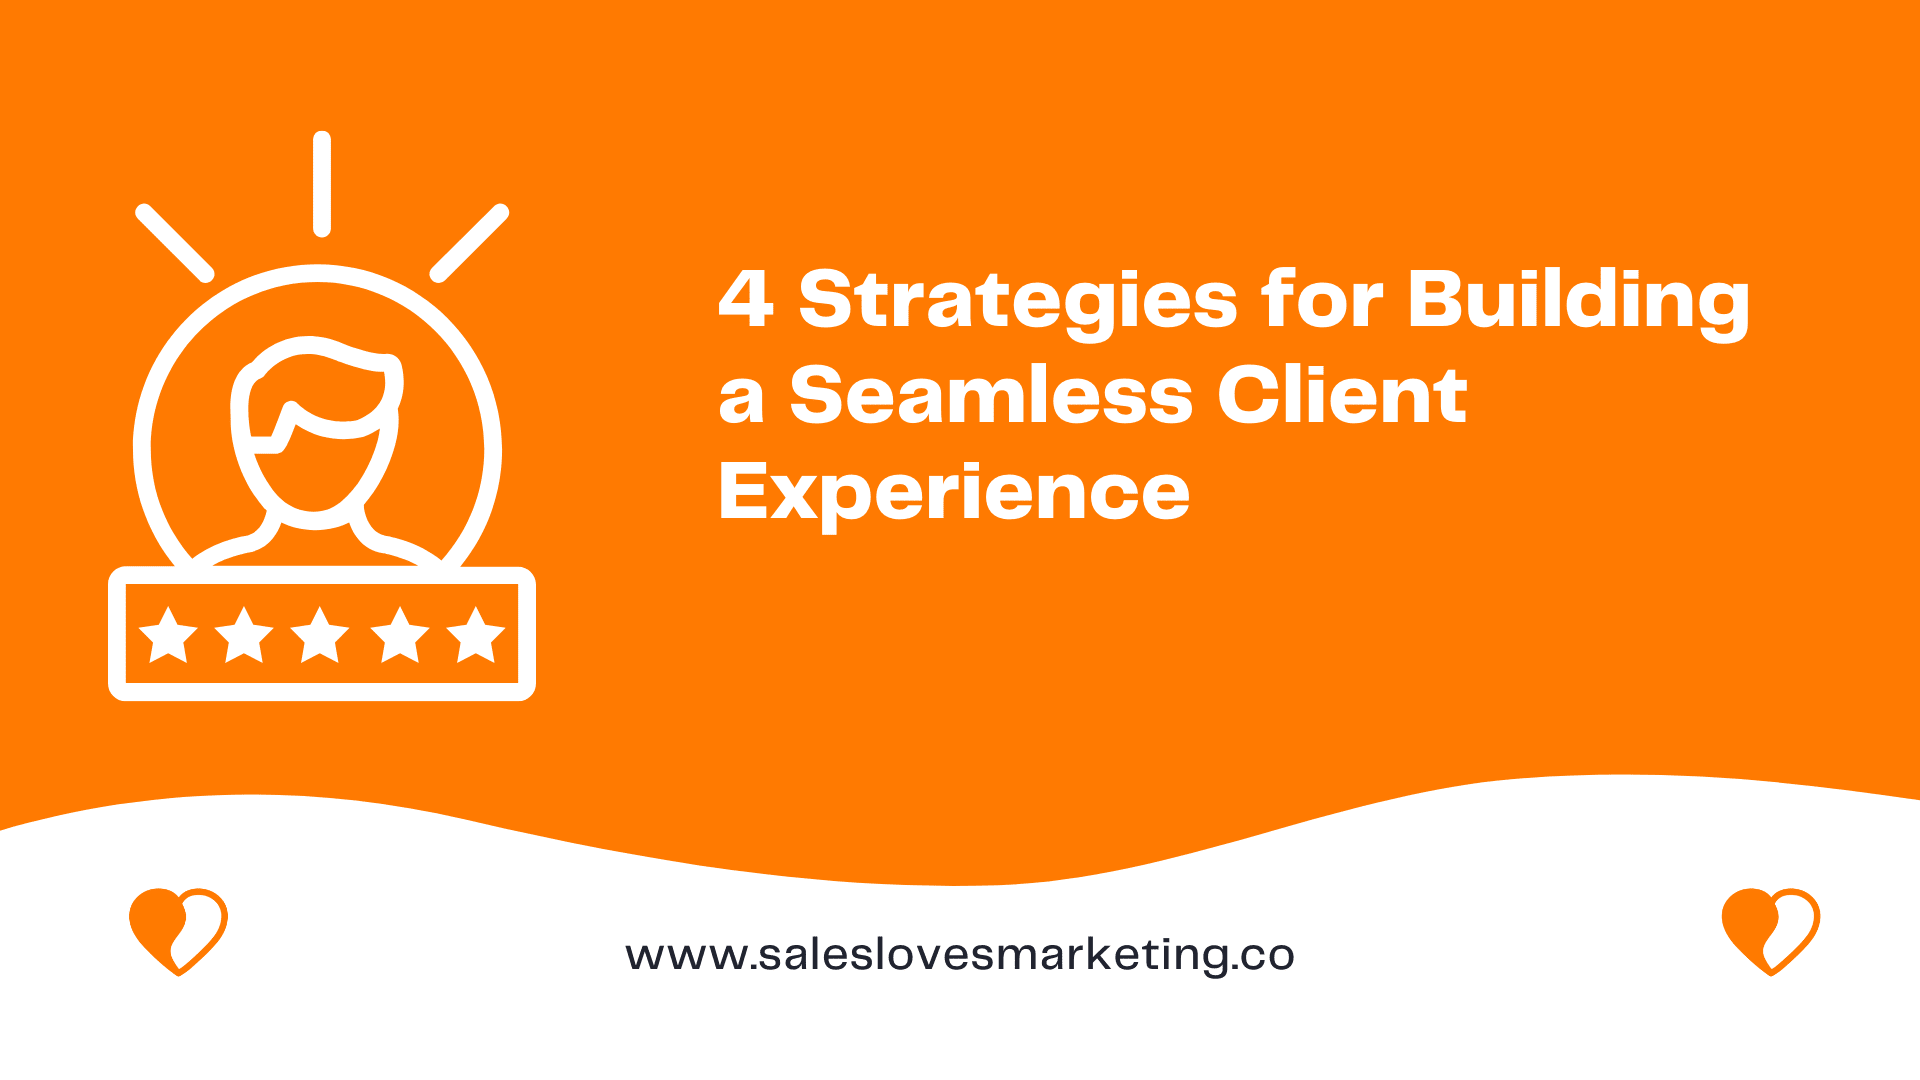 4 Strategies for Building a Seamless Client Experience